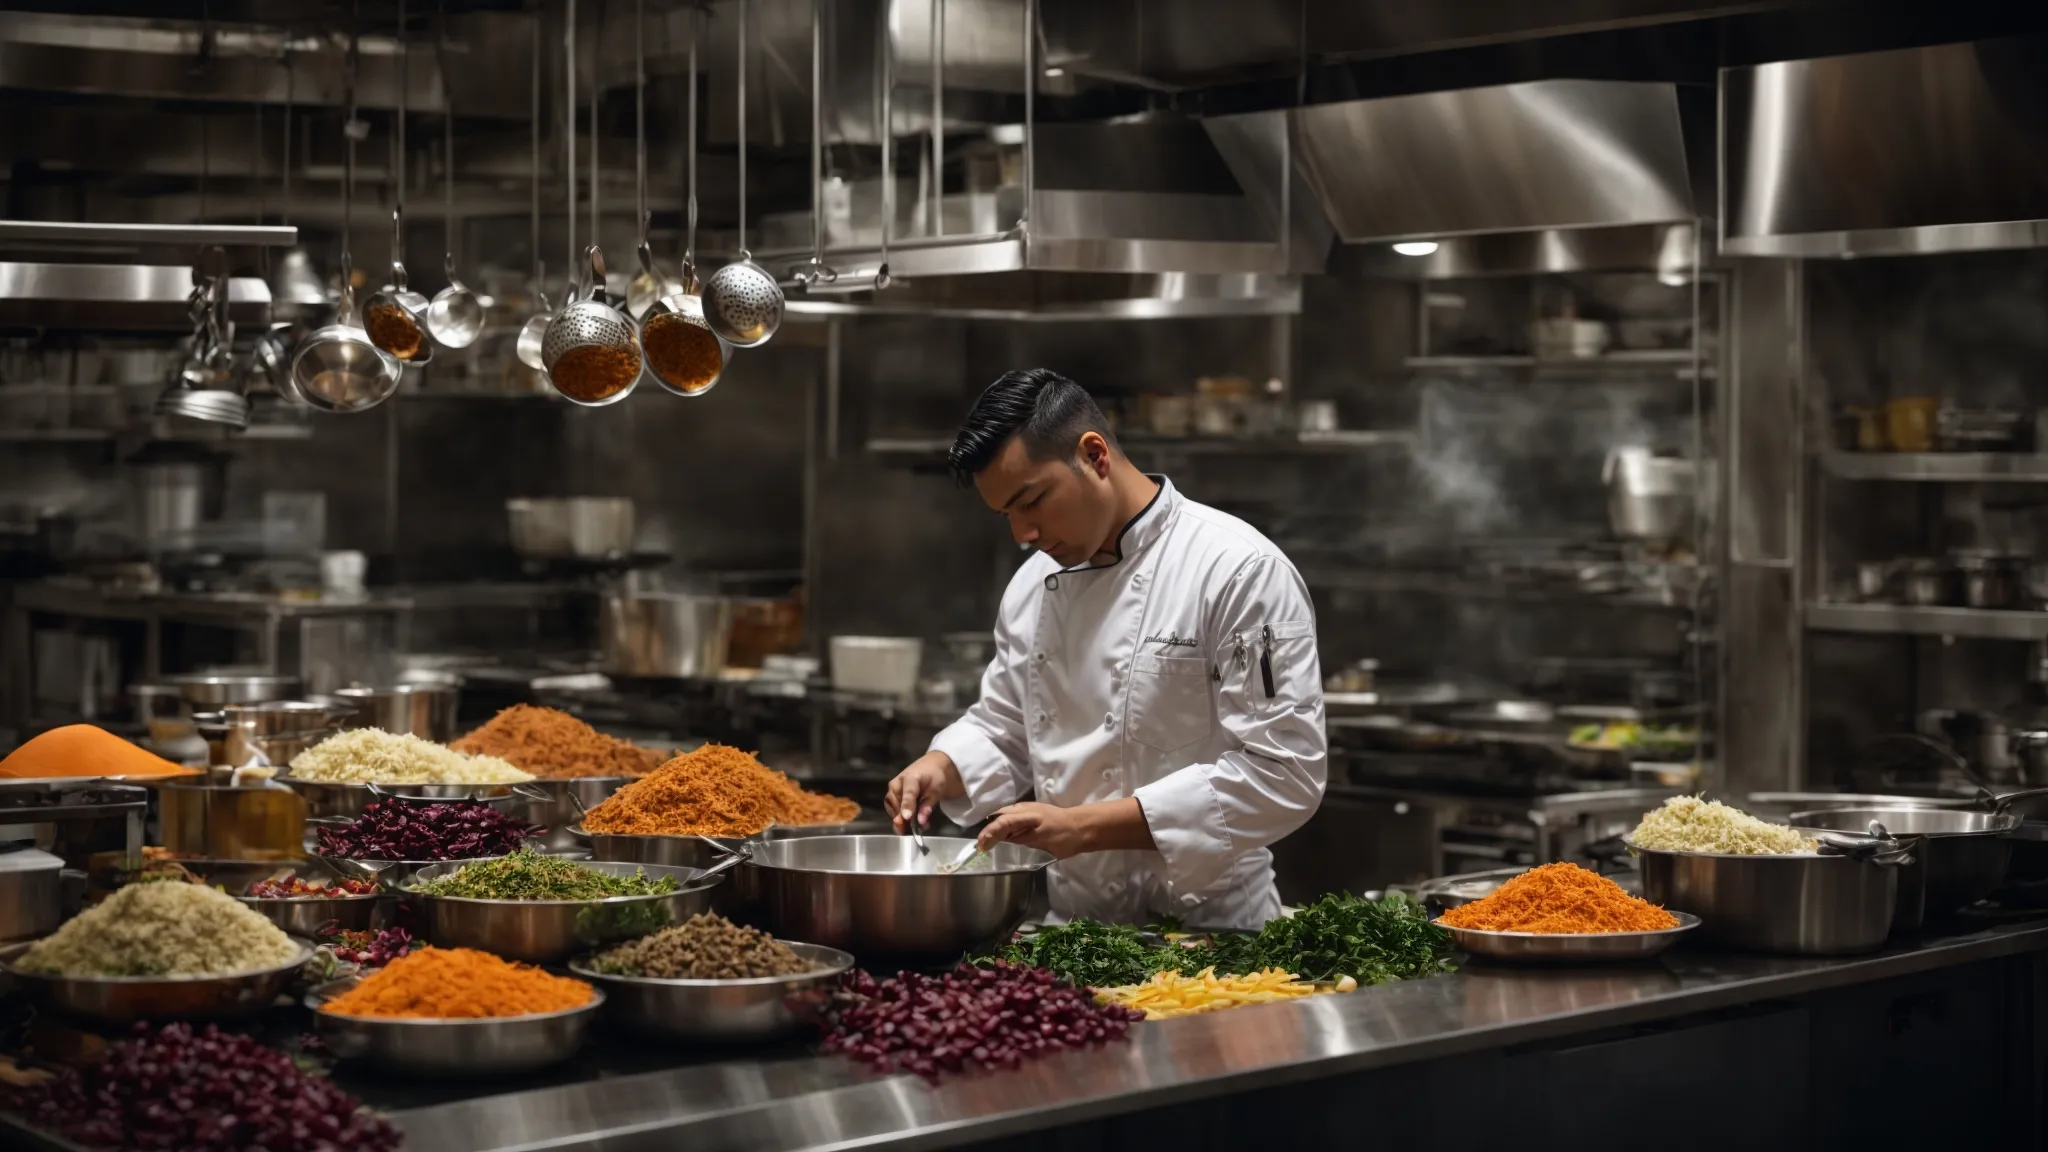 a bustling kitchen with a chef working intently over a vibrant array of ingredients spread across a stainless steel counter.